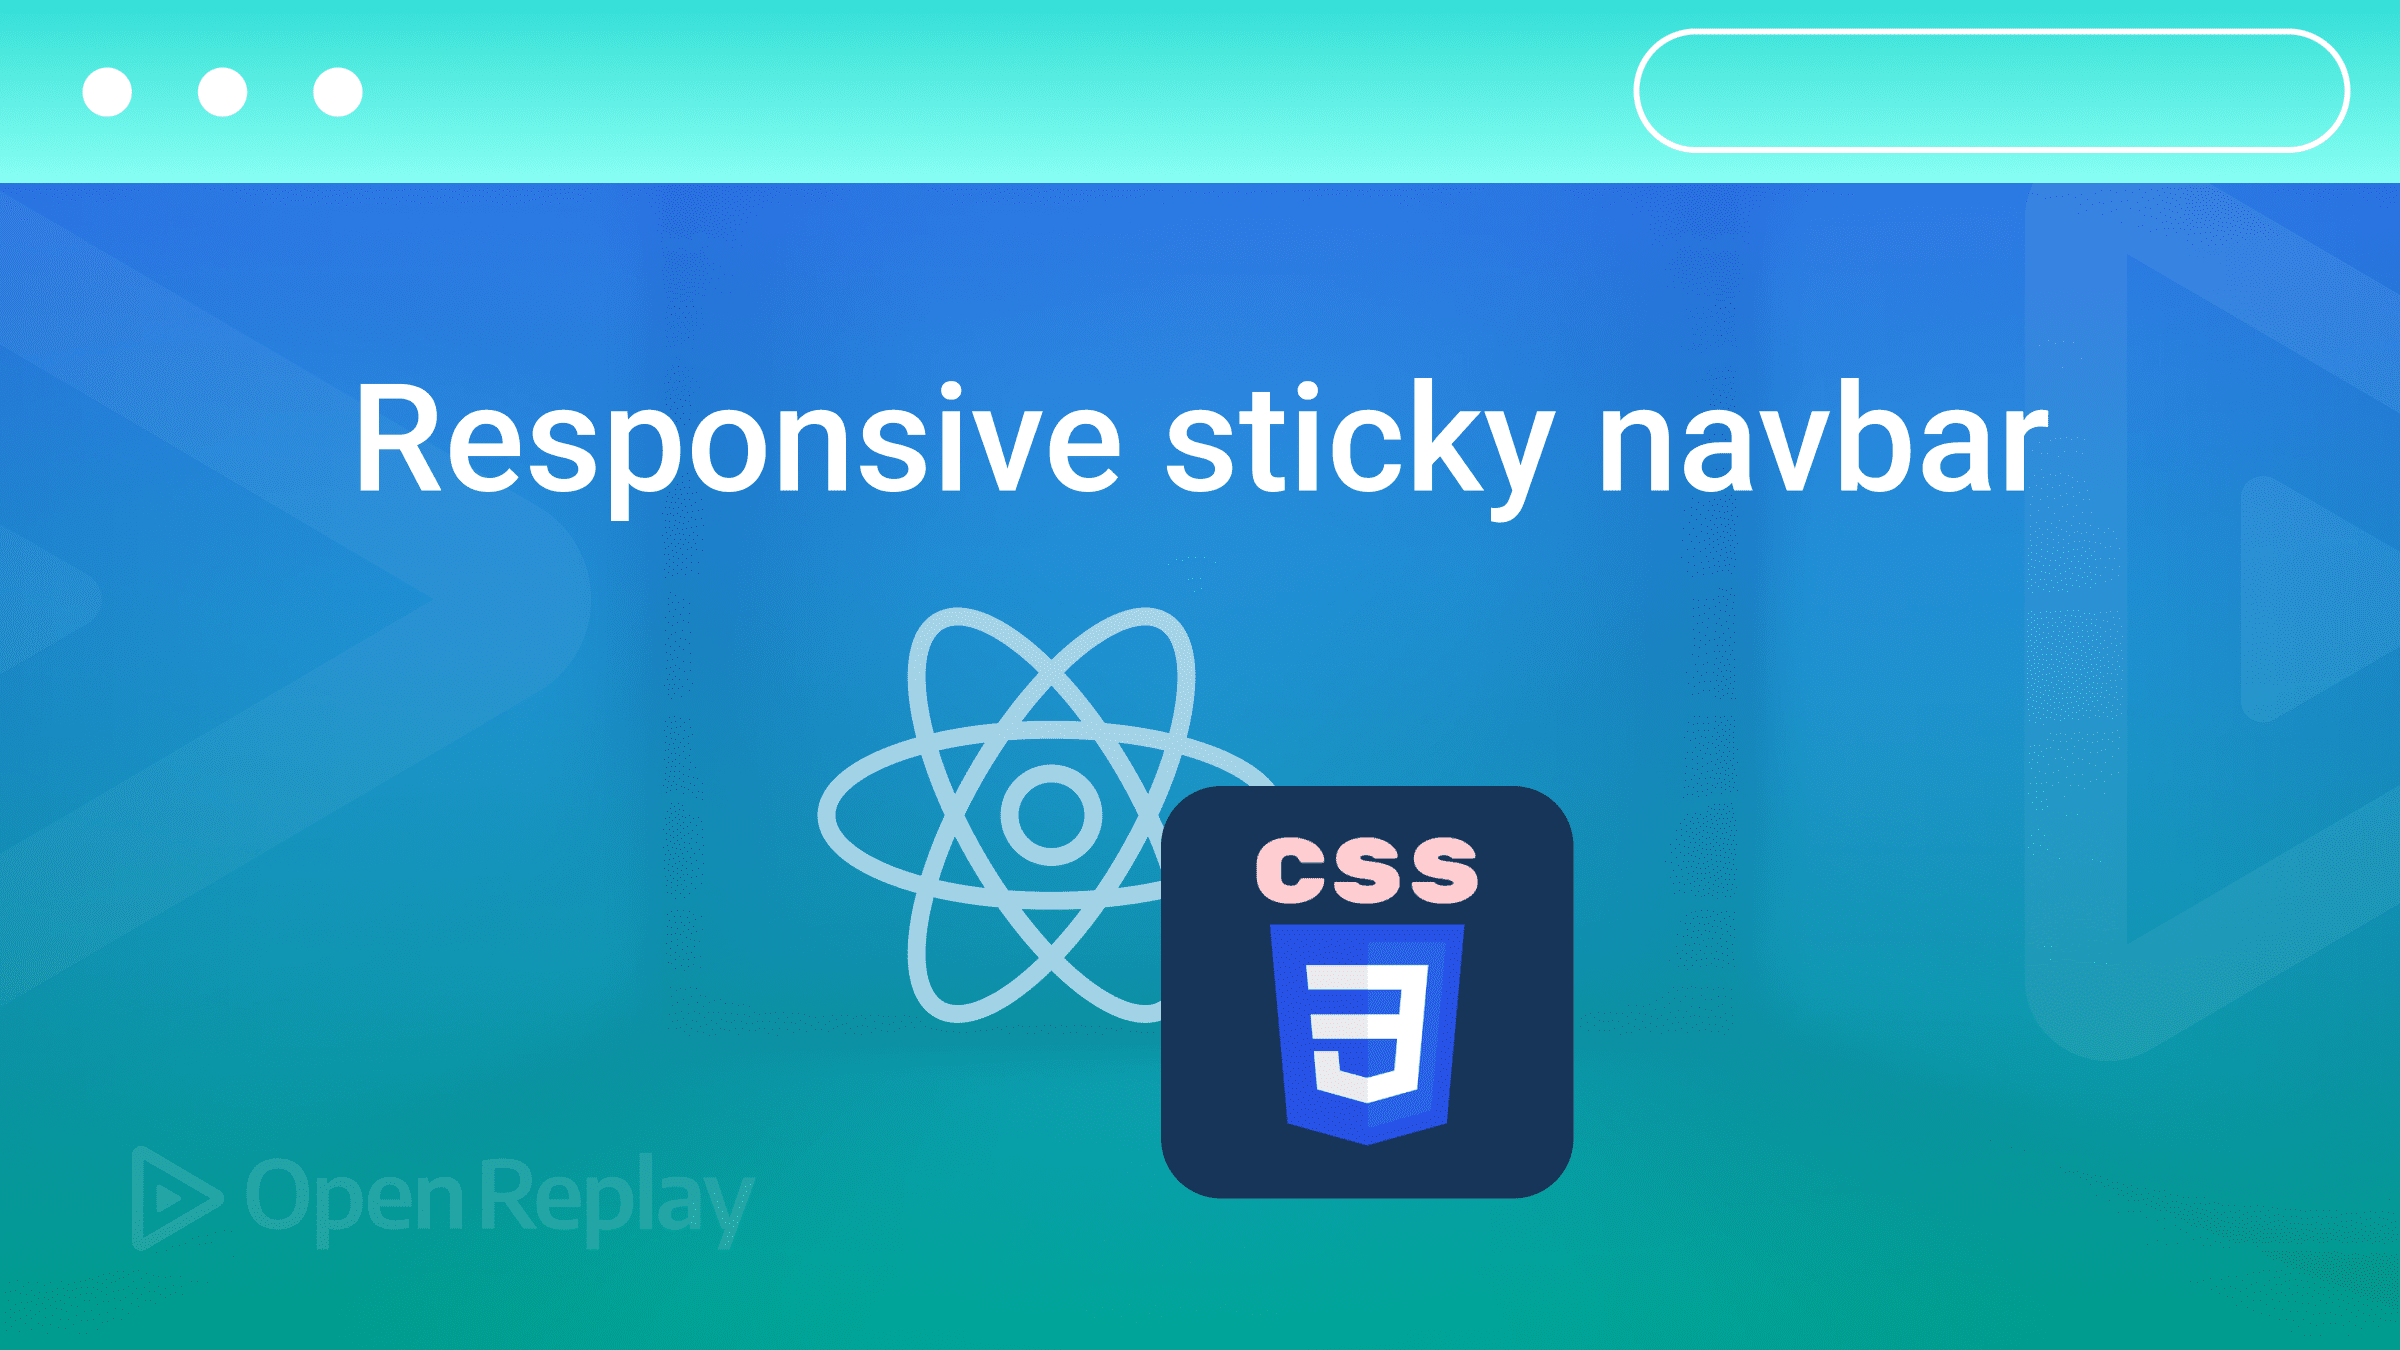 Building a responsive sticky navbar with CSS